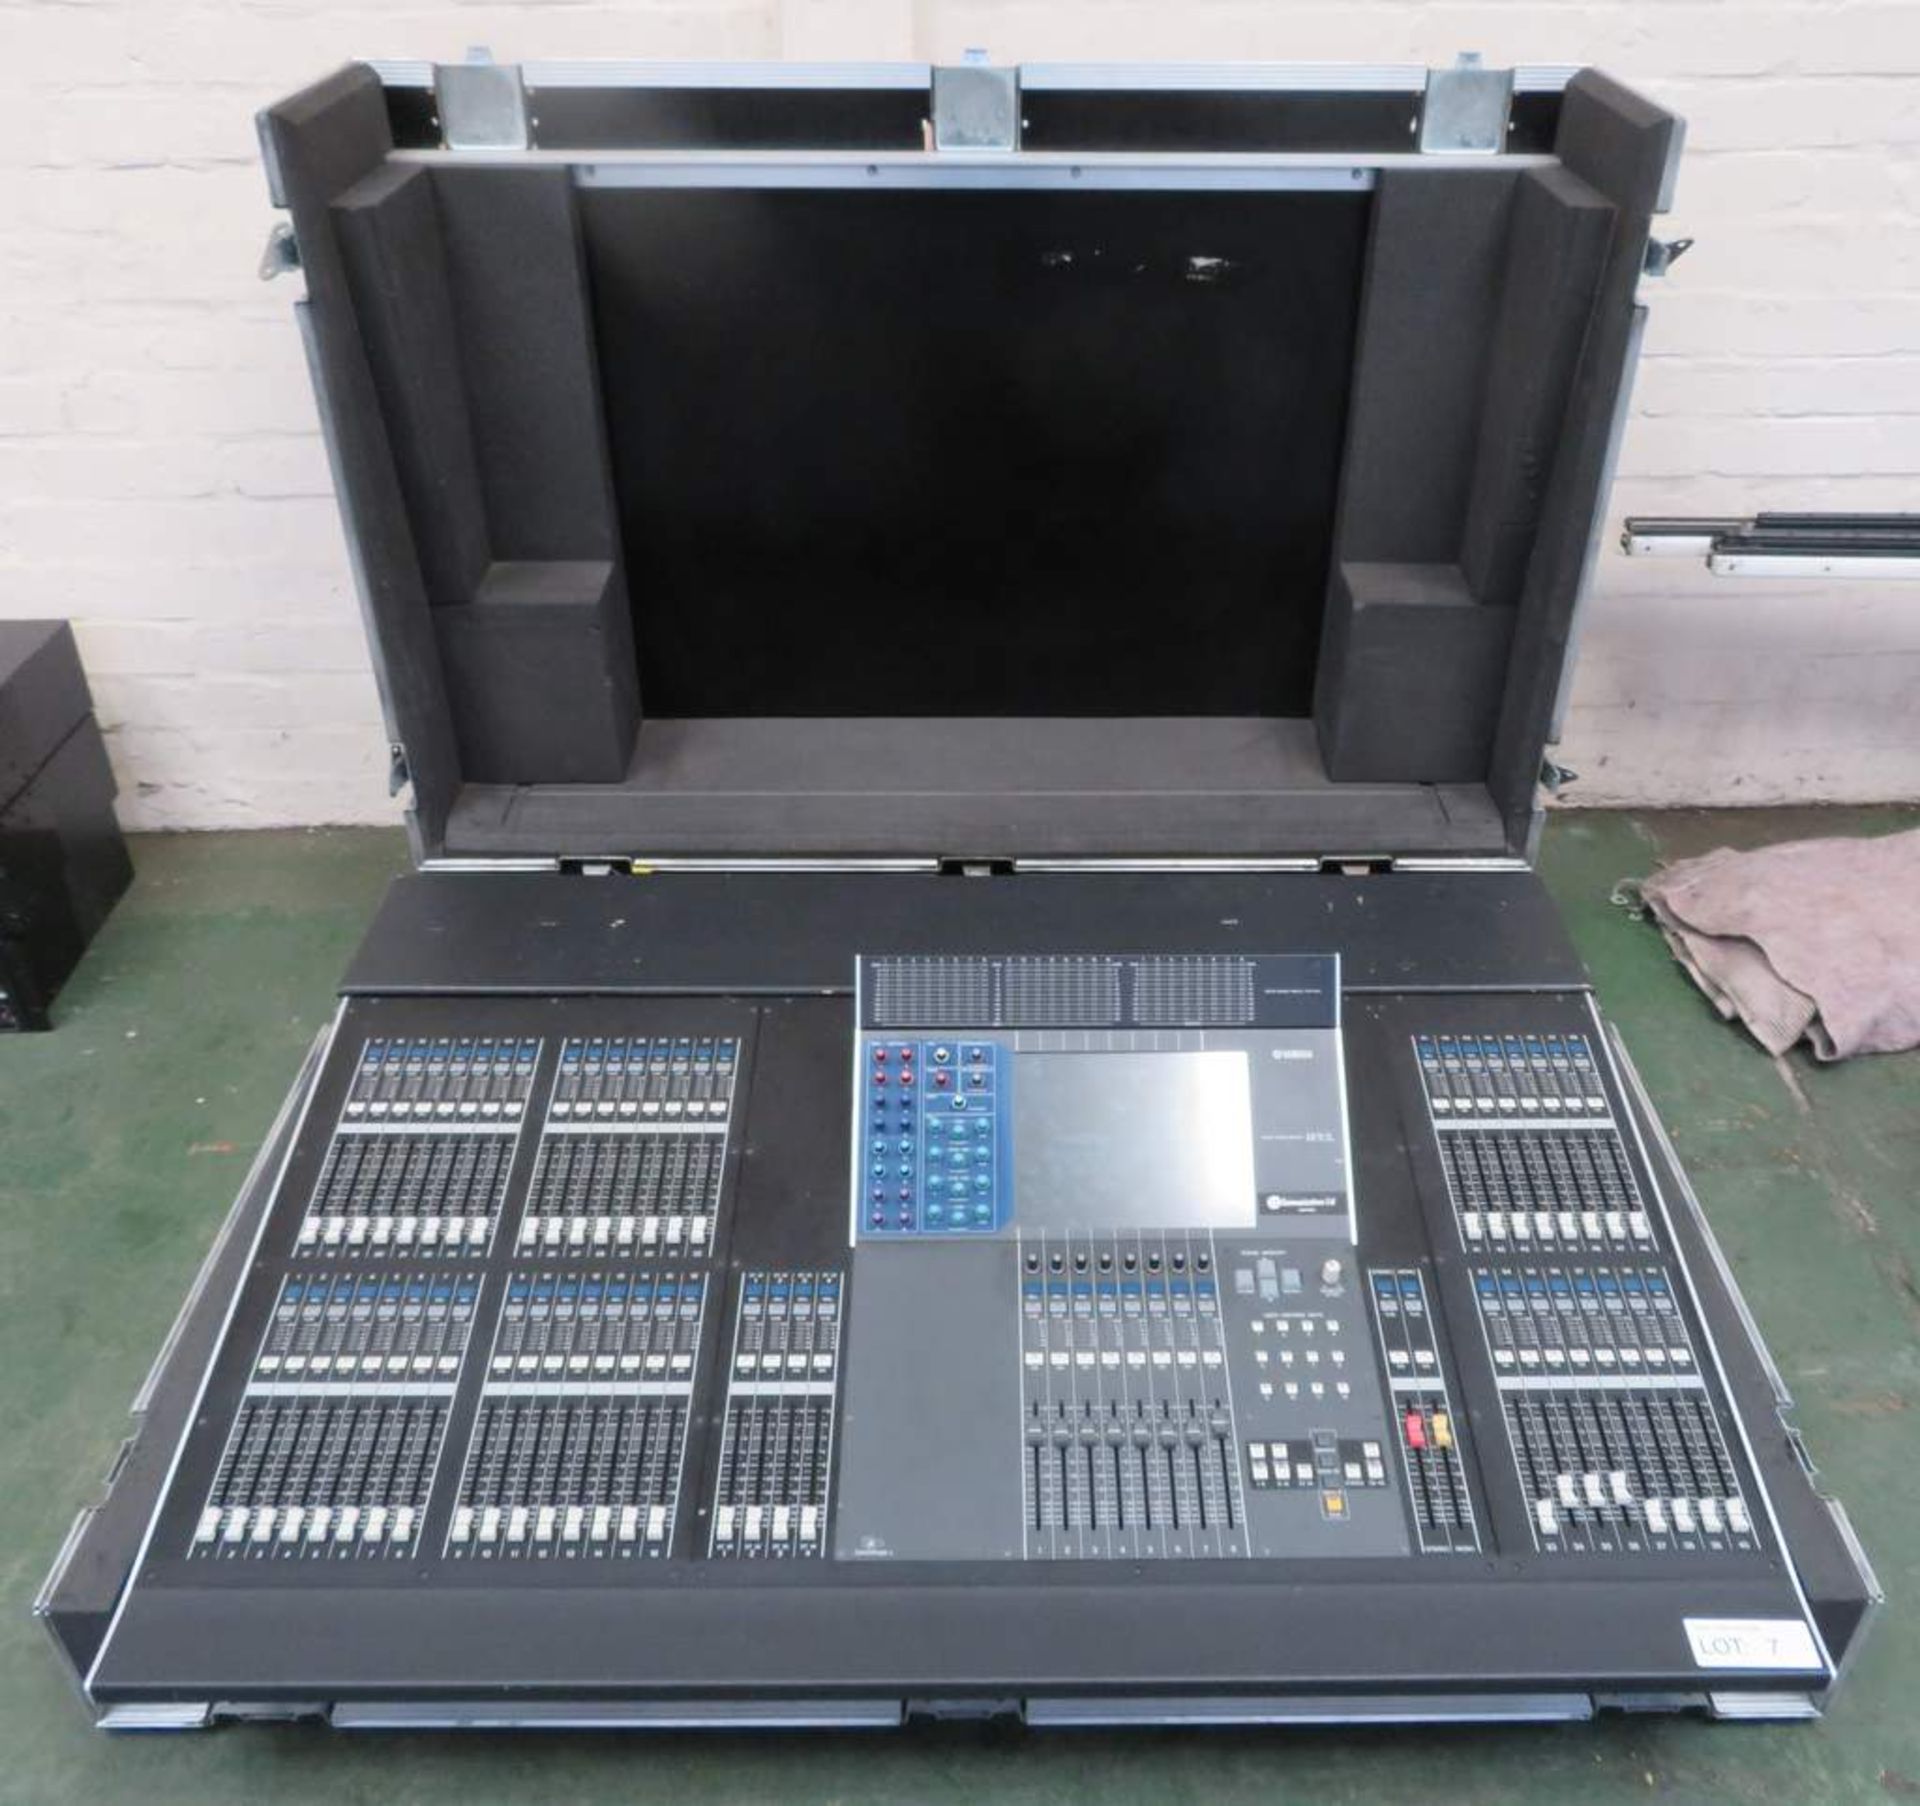 Yamaha M7CL 48 channel digital mixing console with meter bridge and 3 SB168 Digital Stagebox